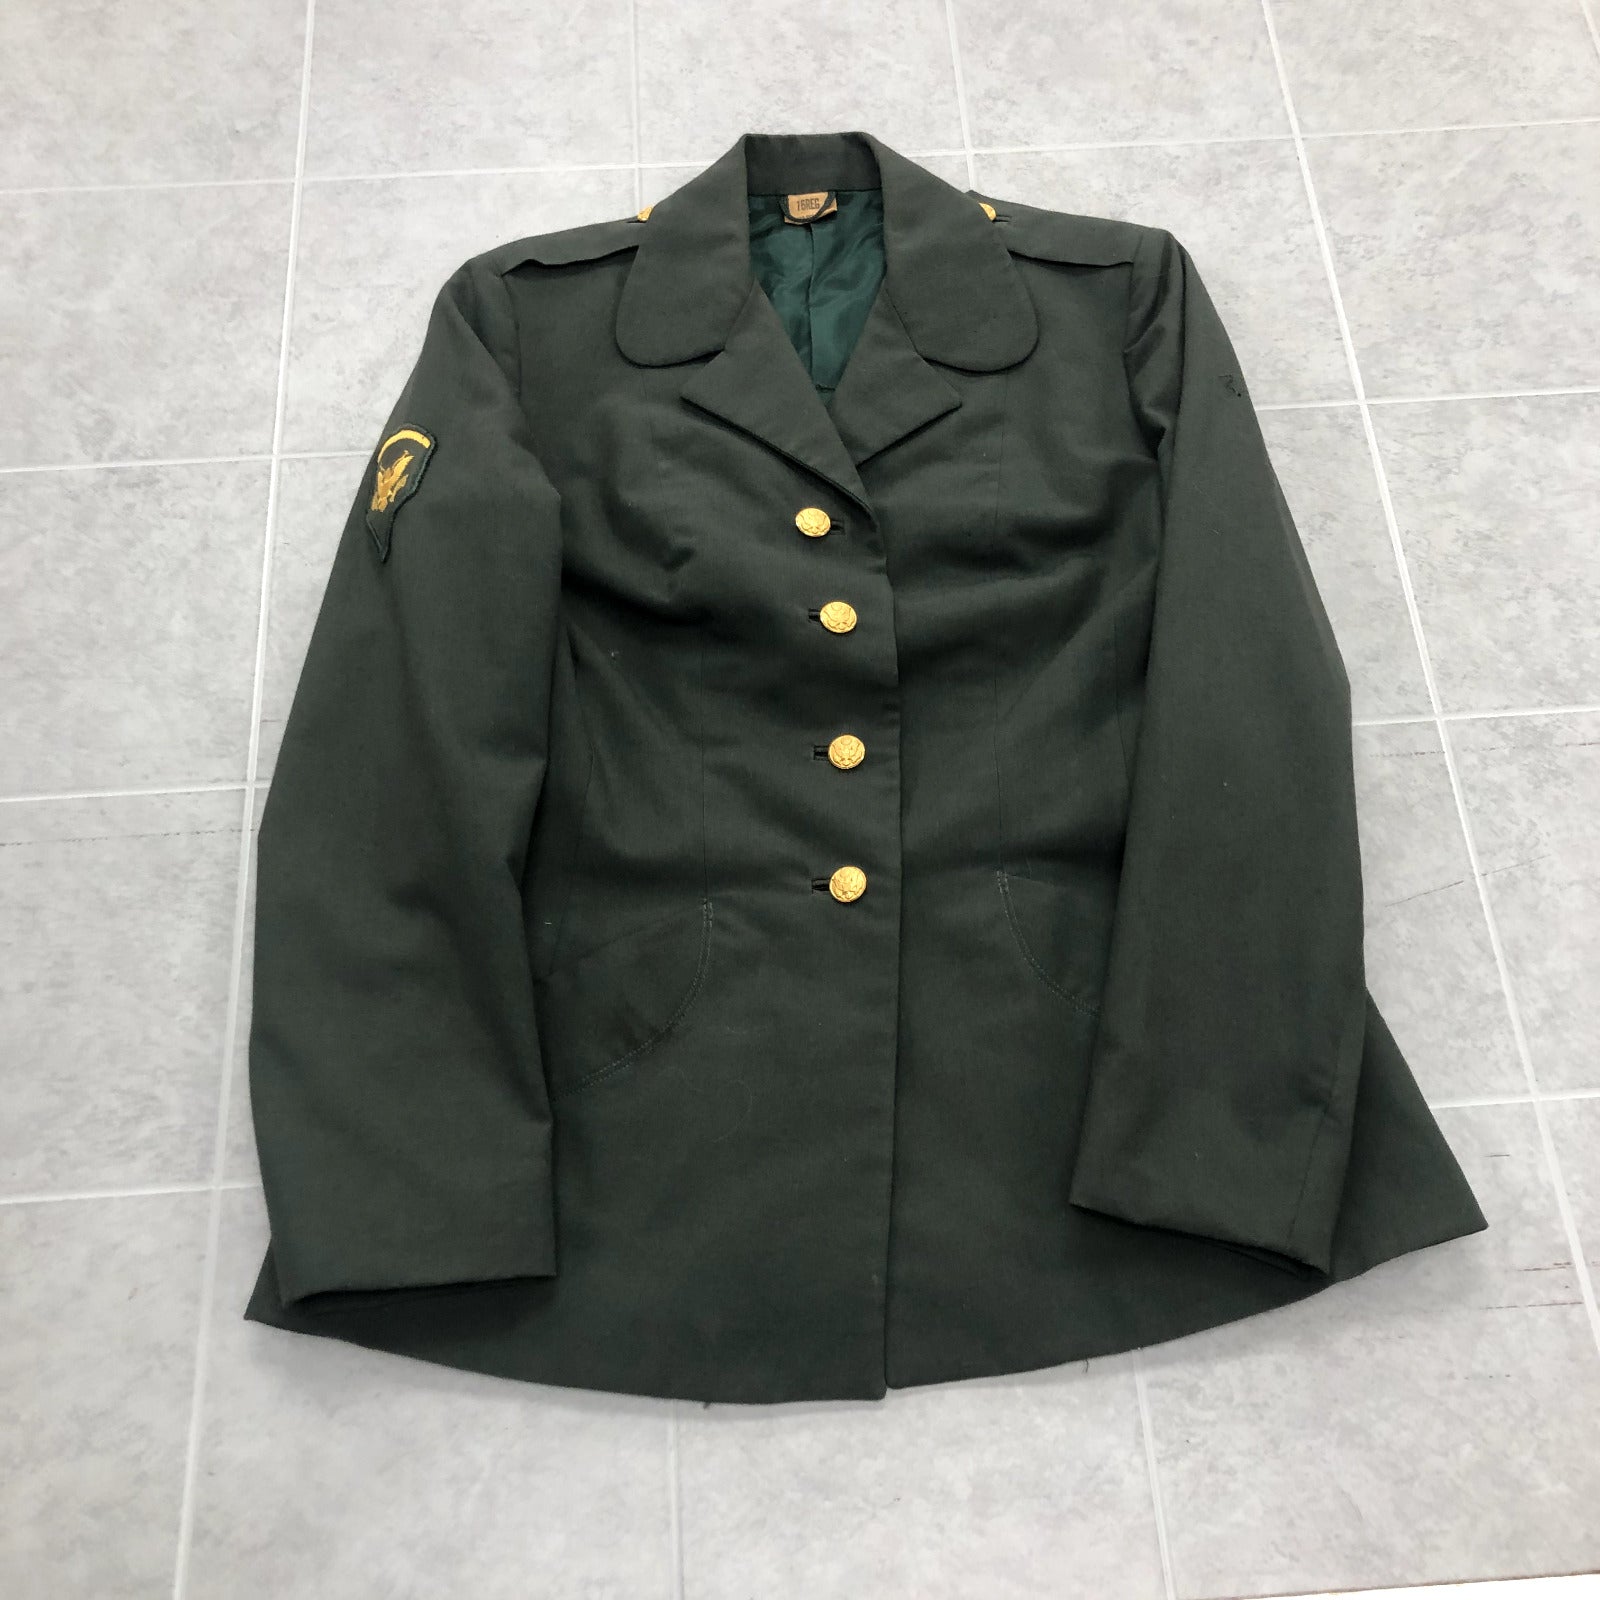 Vintage Green Lined Long Sleeve Button Up WW2 Military Jacket Womens Size 16R